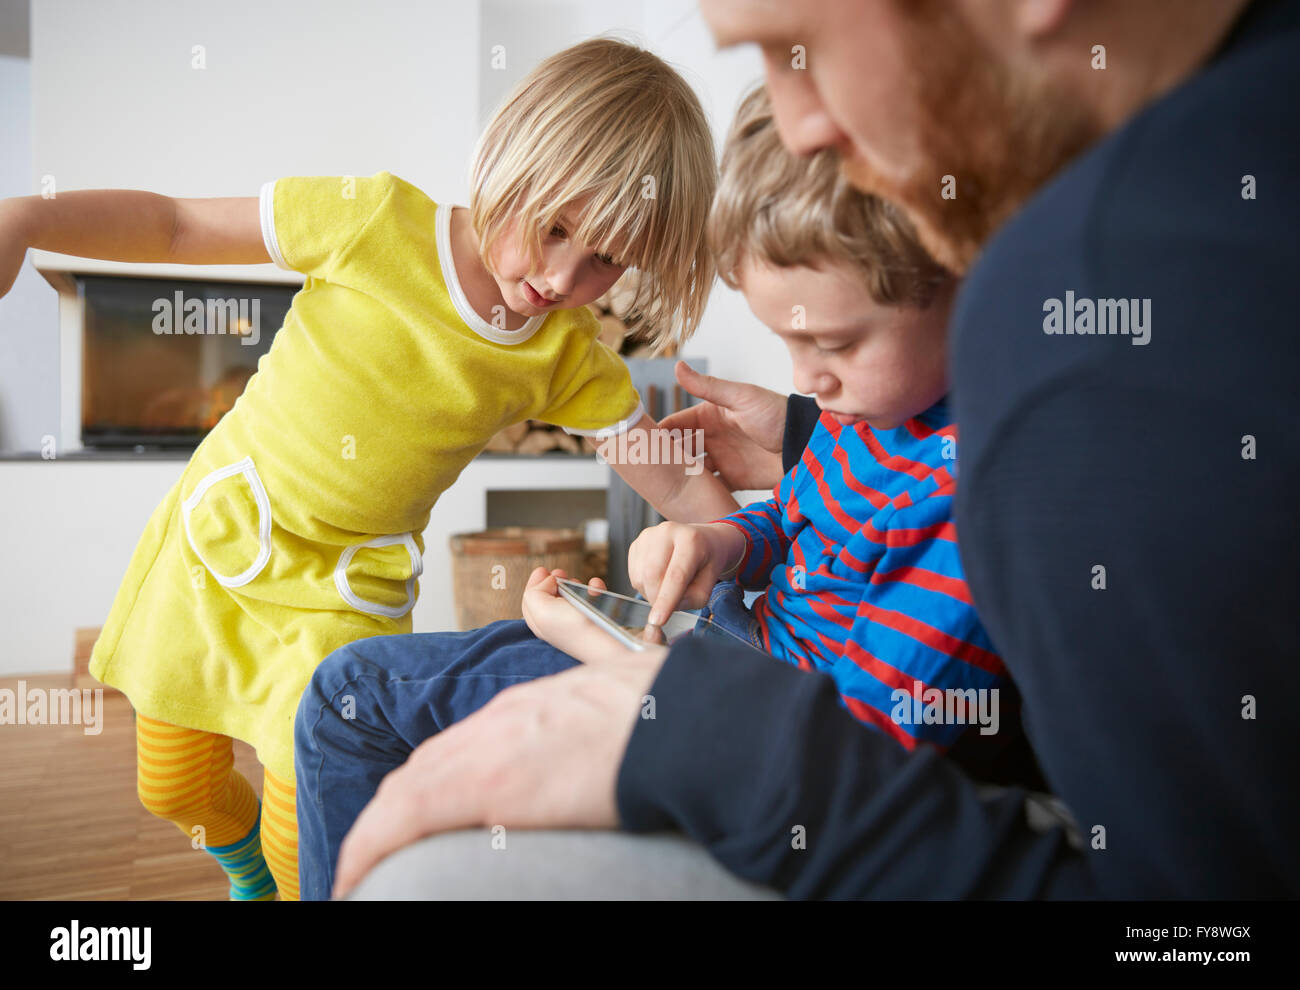 Father and two children using digital tablet Stock Photo